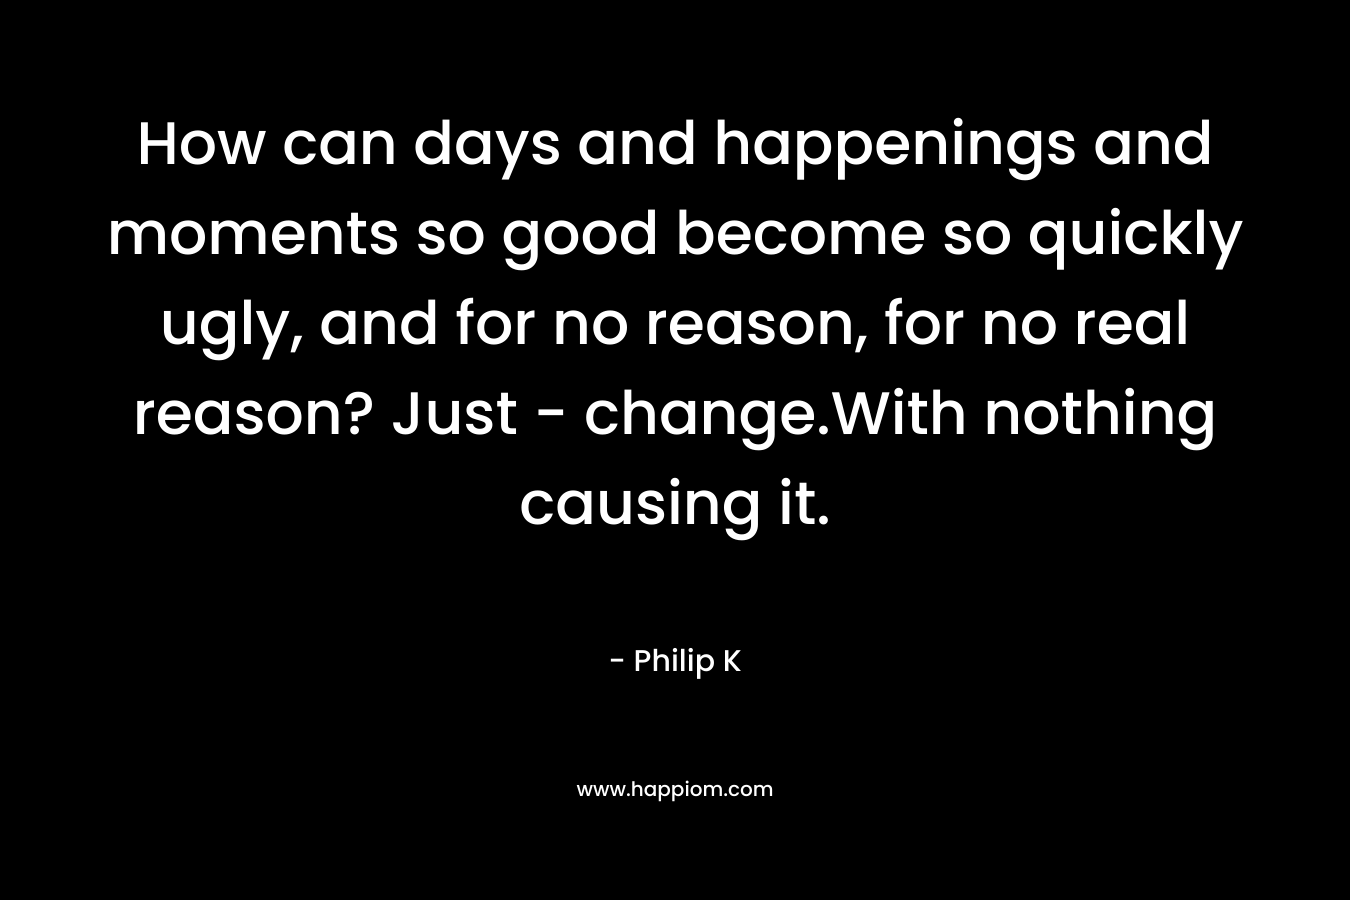 How can days and happenings and moments so good become so quickly ugly, and for no reason, for no real reason? Just - change.With nothing causing it.